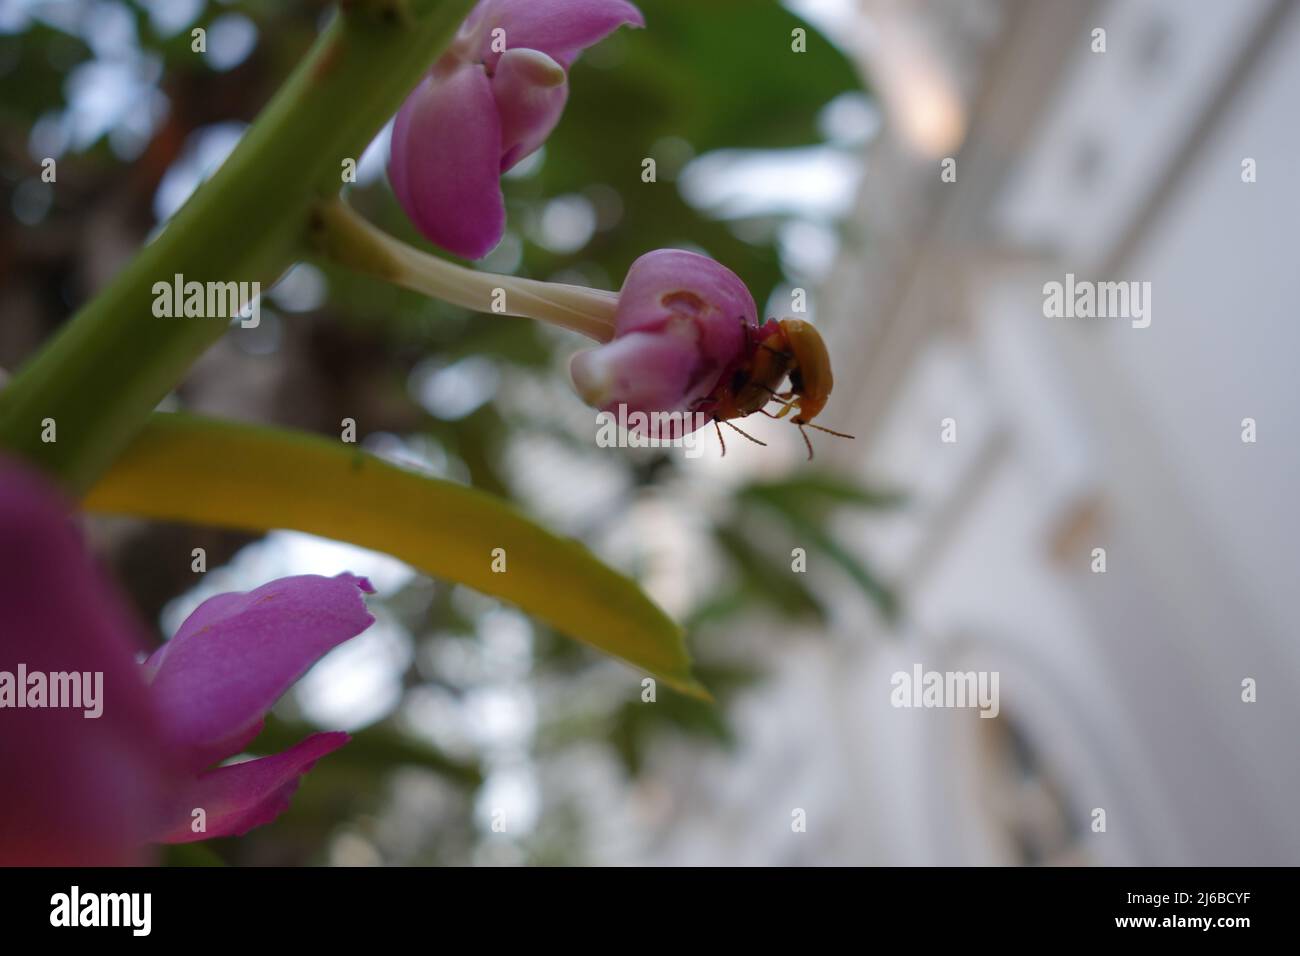 Purple orchid with two yellow beetles against a blurred background Stock Photo